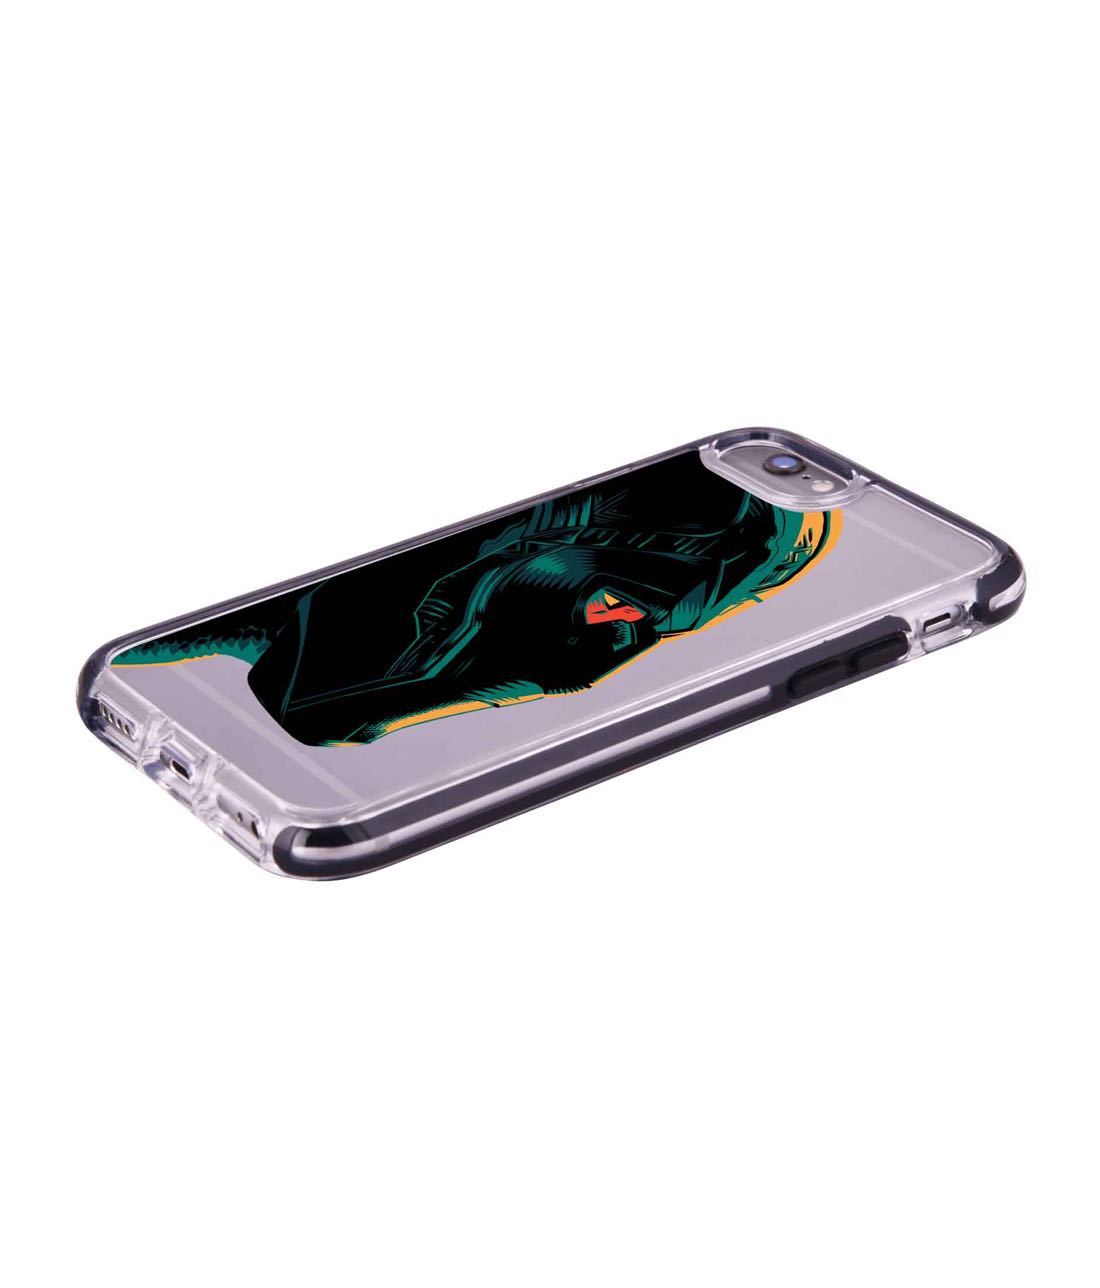 Illuminated Black Panther - Extreme Phone Case for iPhone 6S